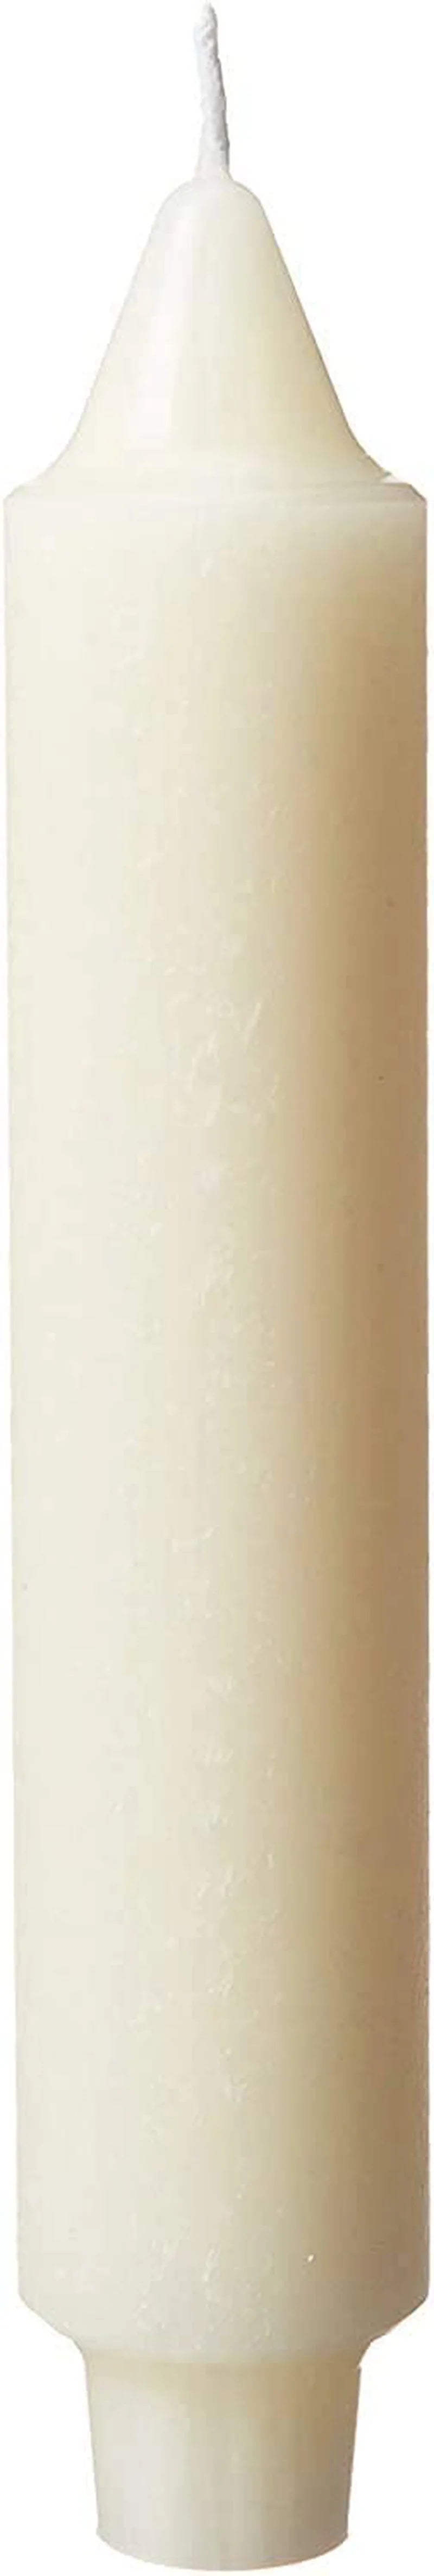 Root Unscented Timberline Collenettes Dinner Candles, 7-Inch Tall, Box of 4, Ivory Home & Garden > Decor > Home Fragrances > Candles Root Candles   